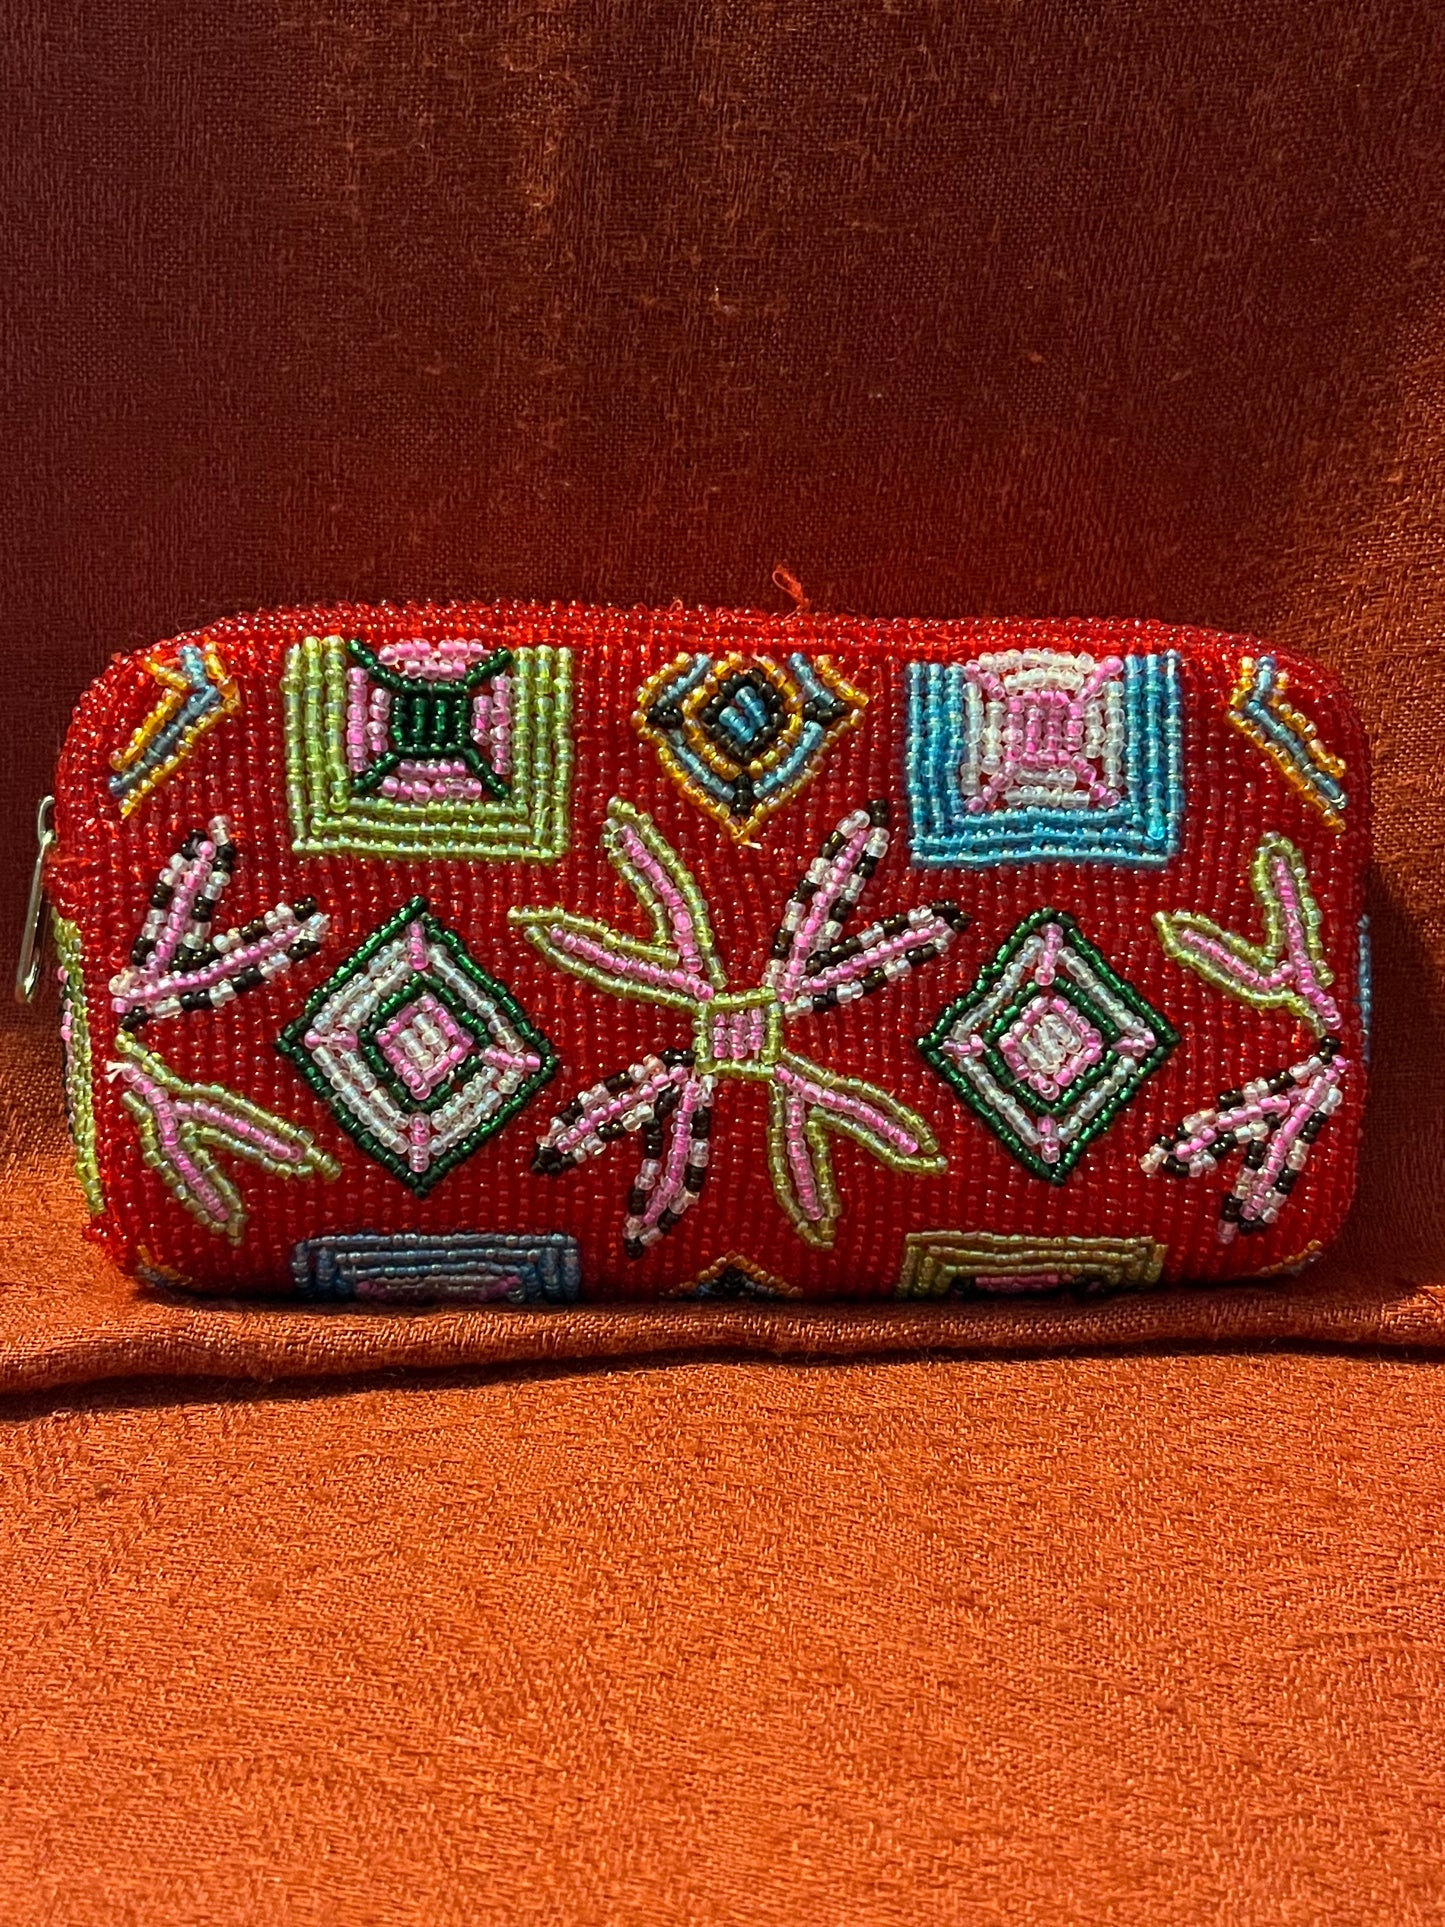 Red and Multi-colored Beaded Evening Clutch or Accessory Bag